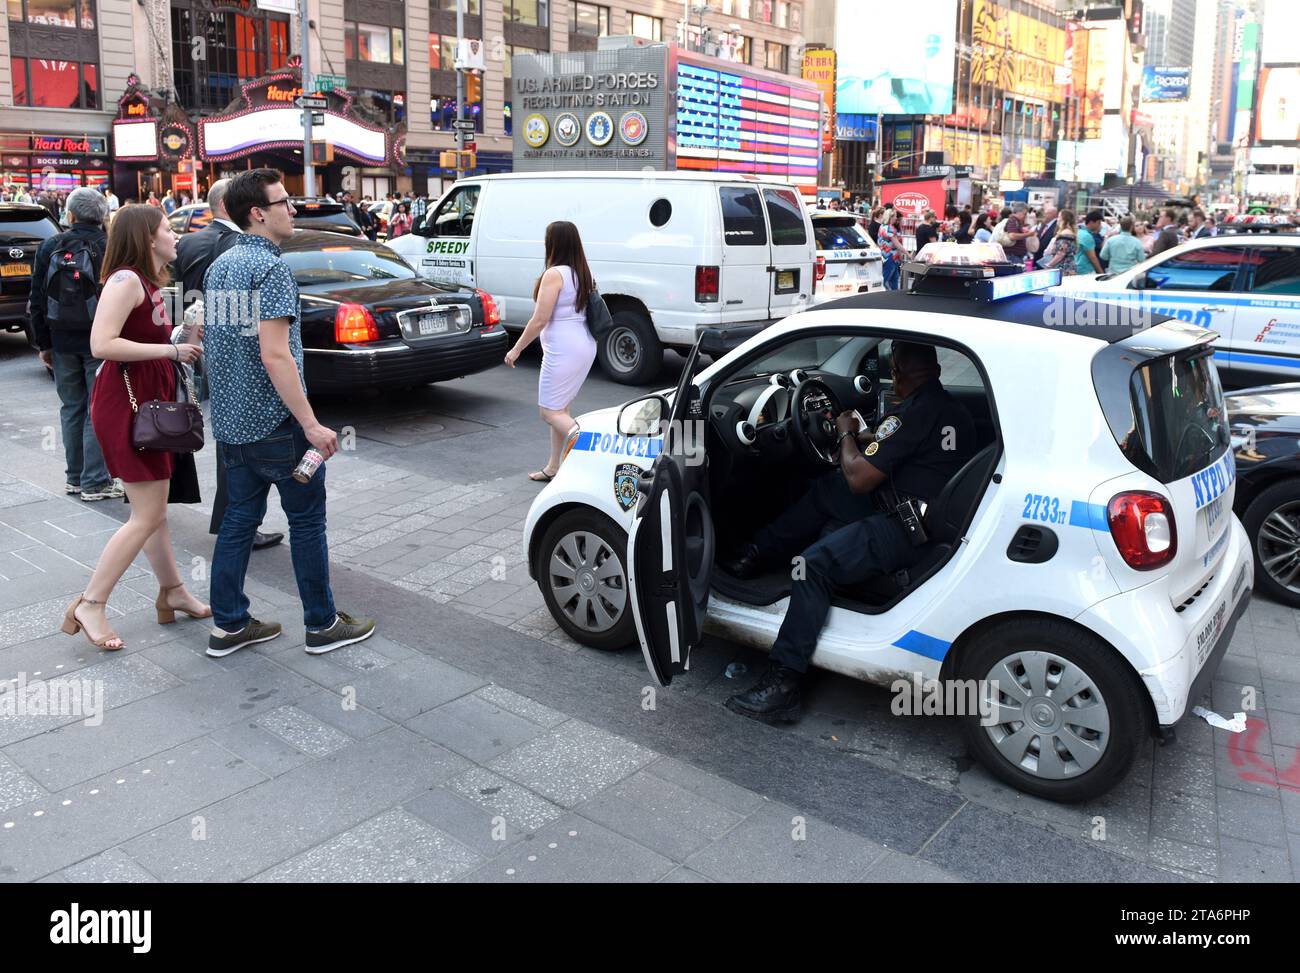 NEW YORK, USA - May 24, 2018: Police officer in police car performing his duties on the streets of Manhattan. New York City Police Department (NYPD). Stock Photo